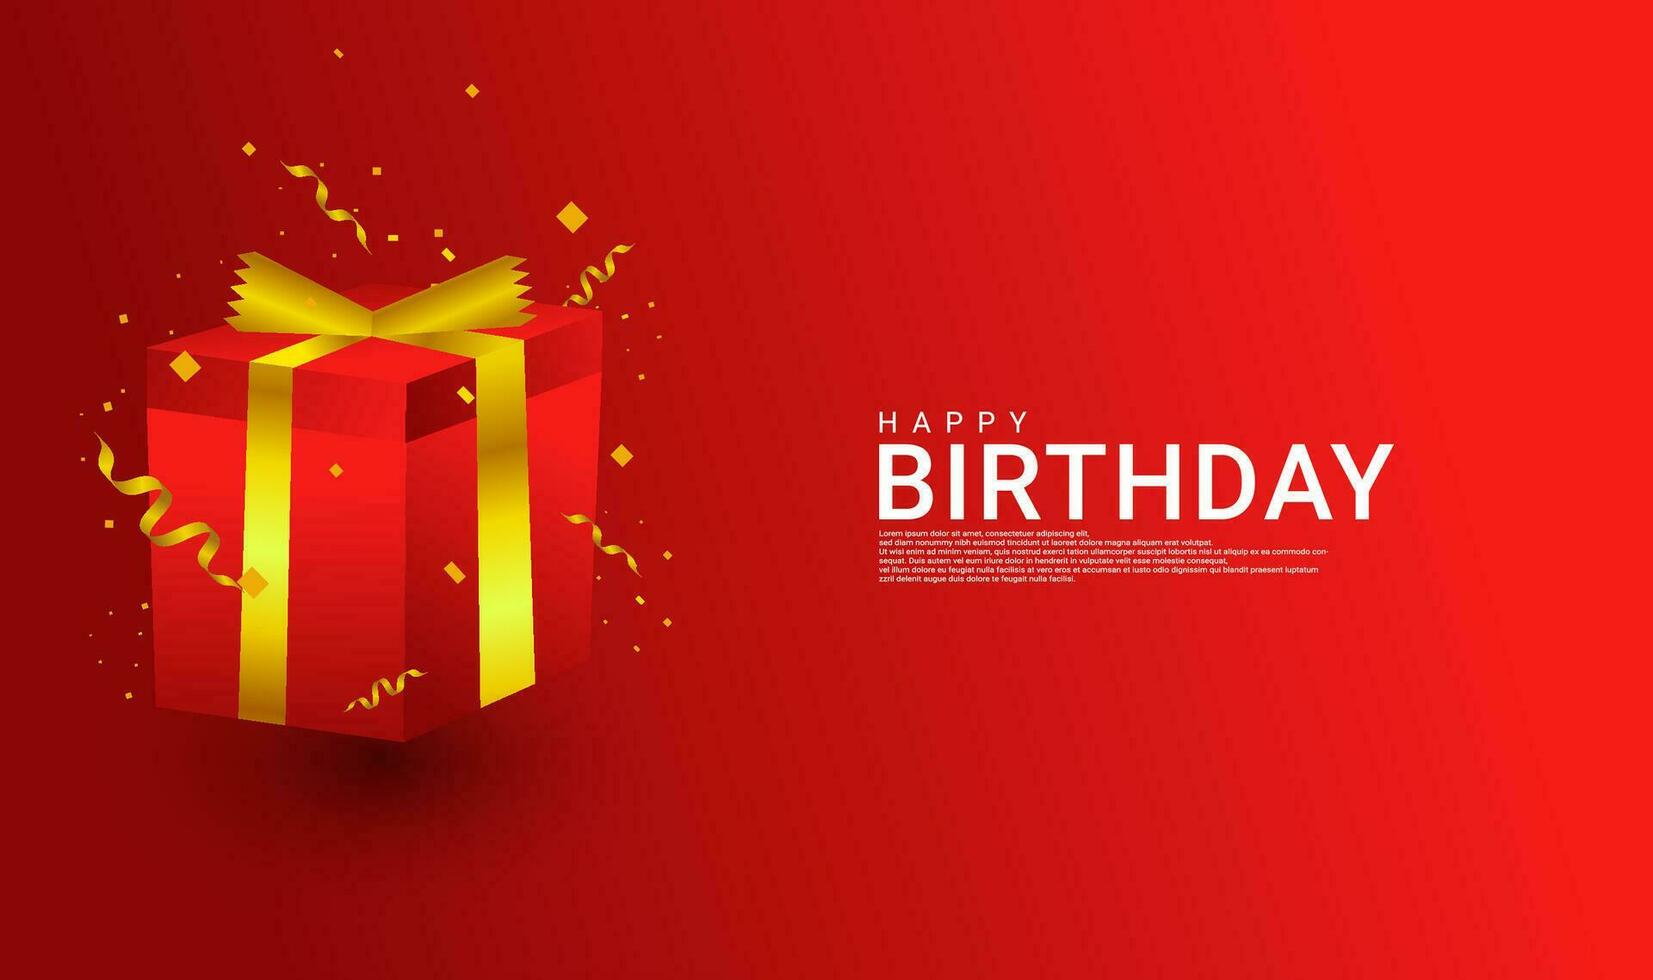 Happy birthday cards, red and gold, suitable for invitation cards, backgrounds, posters, social media posts and more vector